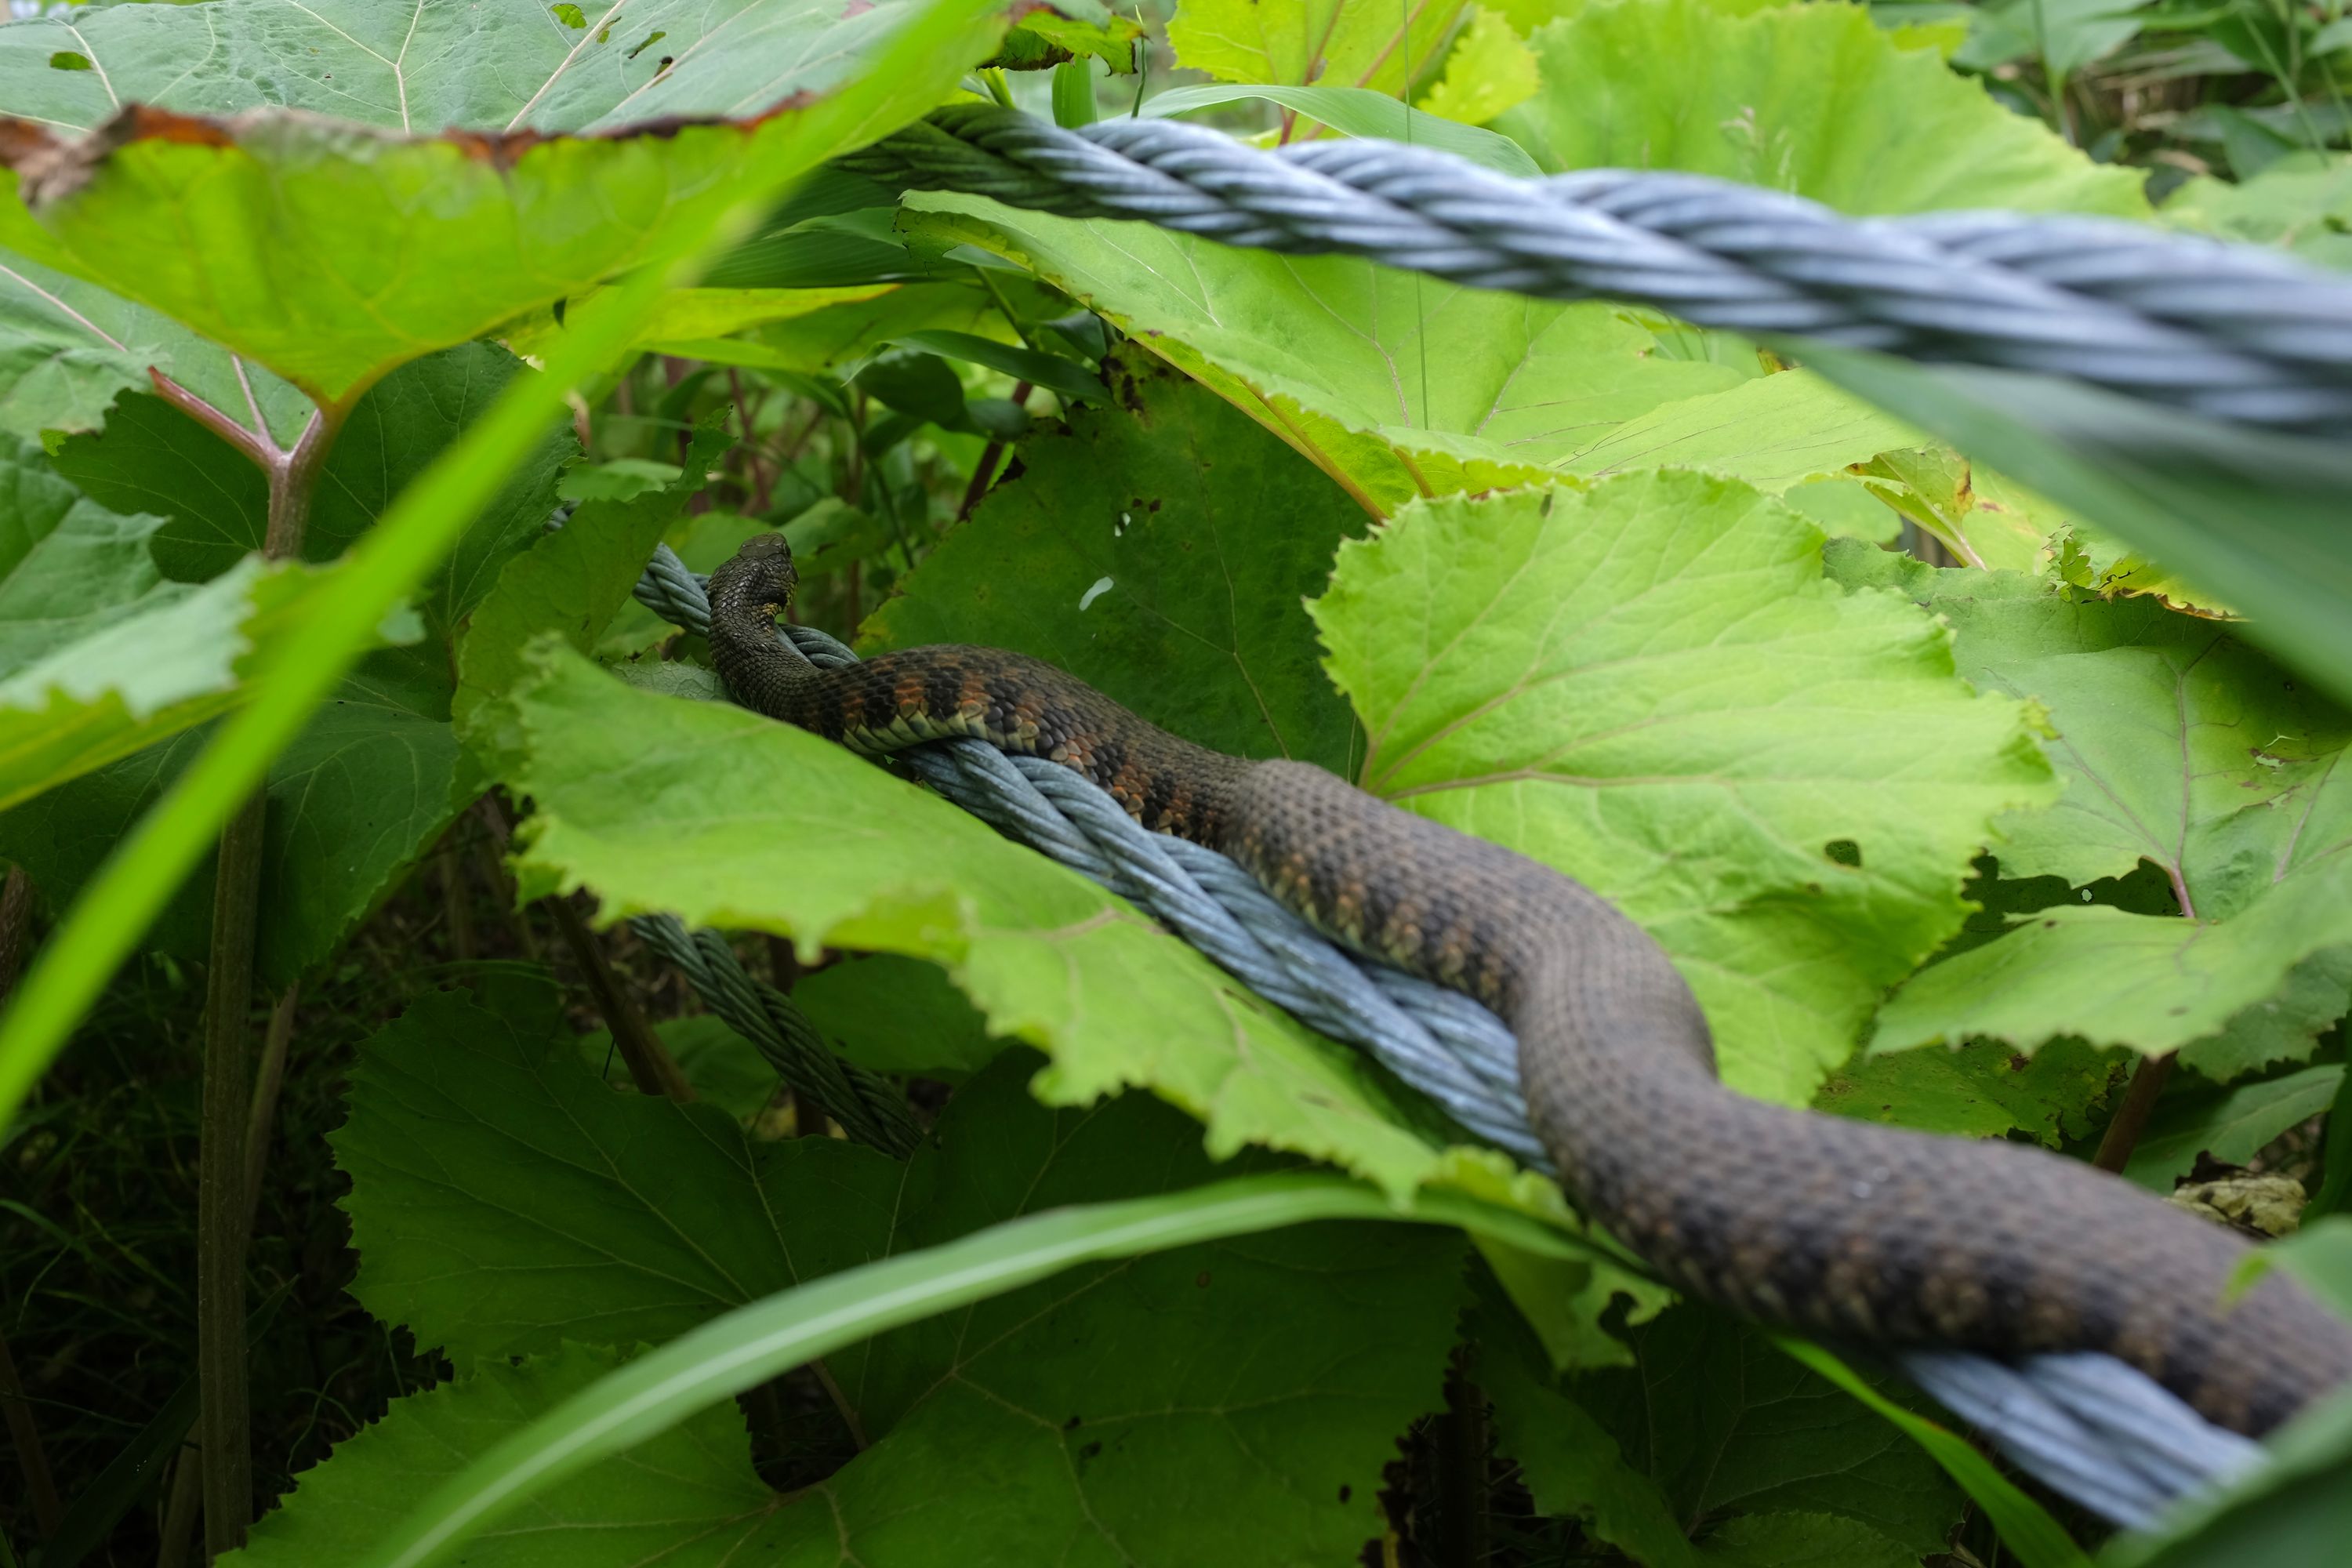 A colorful striped snake, a tiger keelback, rests on the cables of a guardrail under large leaves.